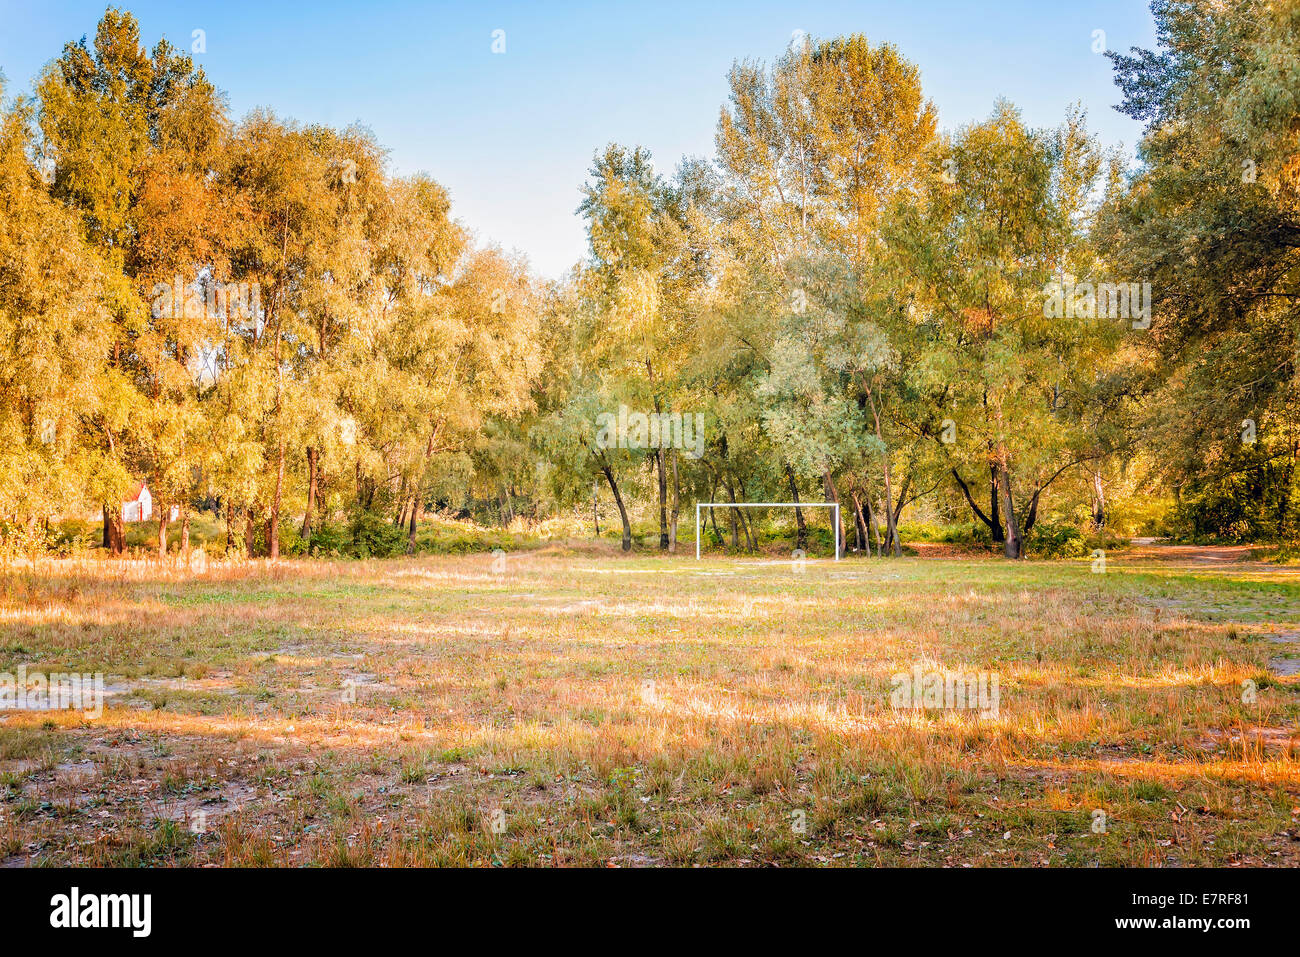 A football (soccer) playground surrounded by trees in the middle of the forest Stock Photo